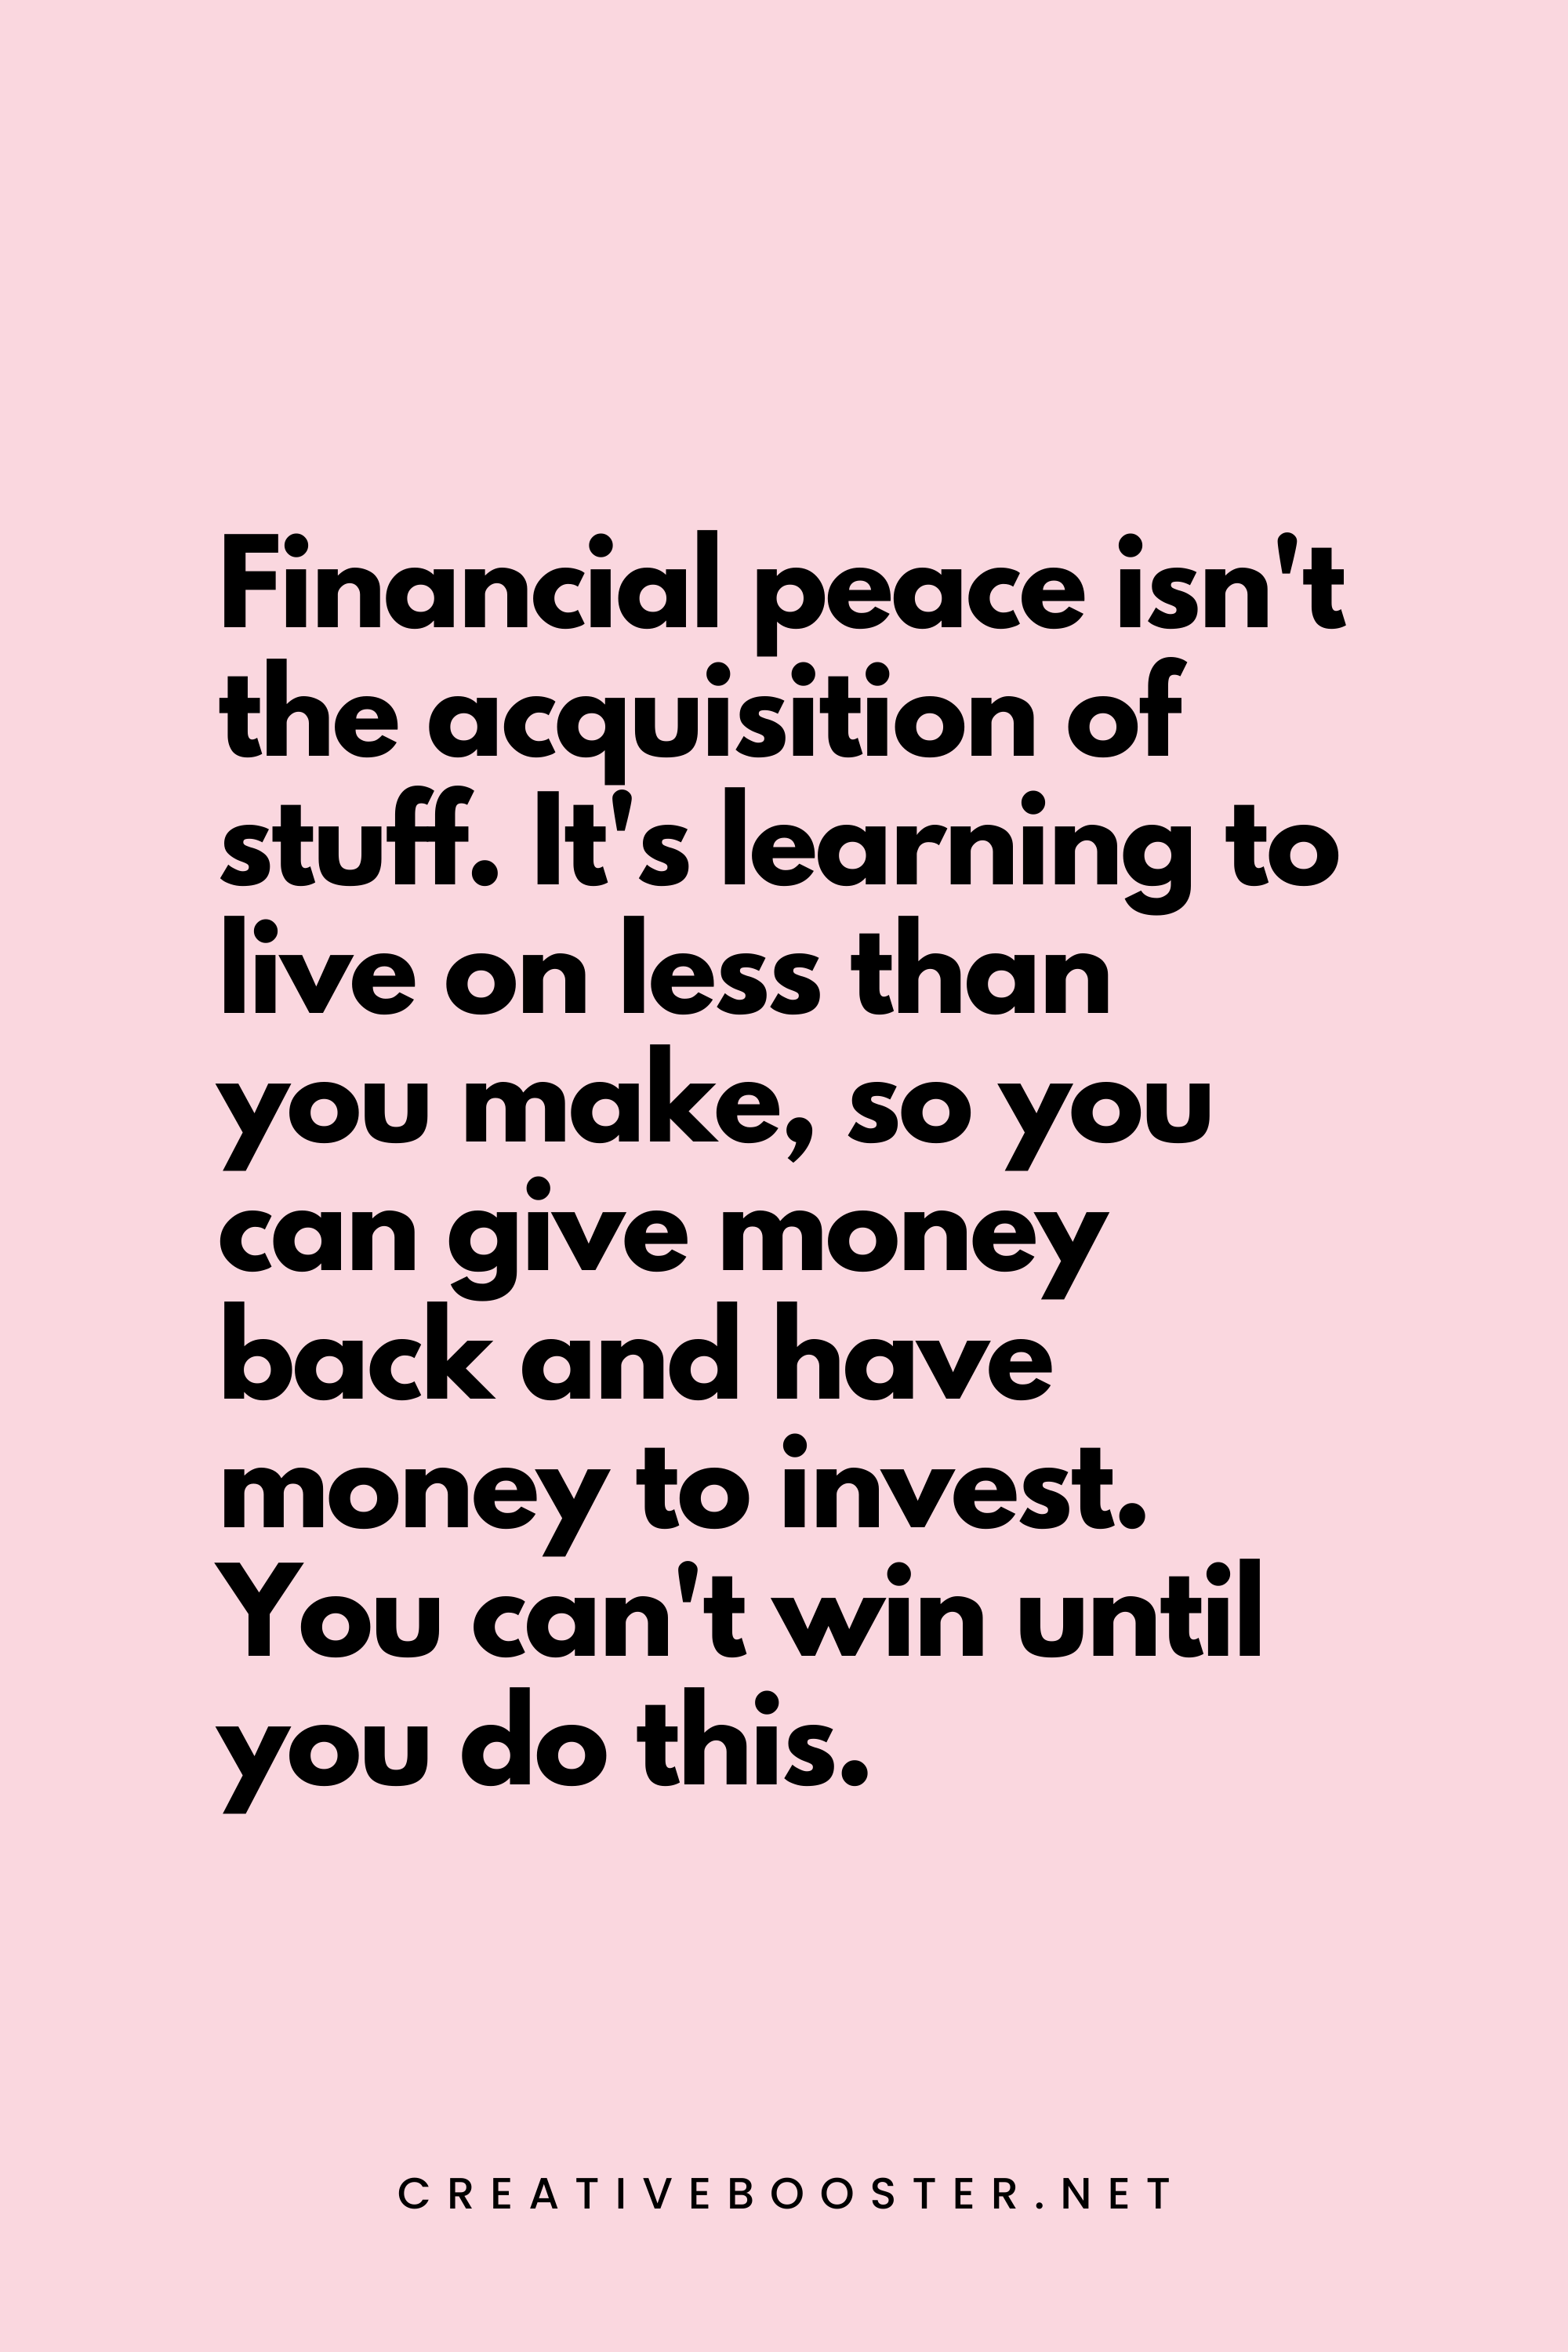 13. Financial peace isn't the acquisition of stuff. It's learning to live on less than you make, so you can give money back and have money to invest. You can't win until you do this. - Dave Ramsey - 1. Popular Financial Freedom Quotes